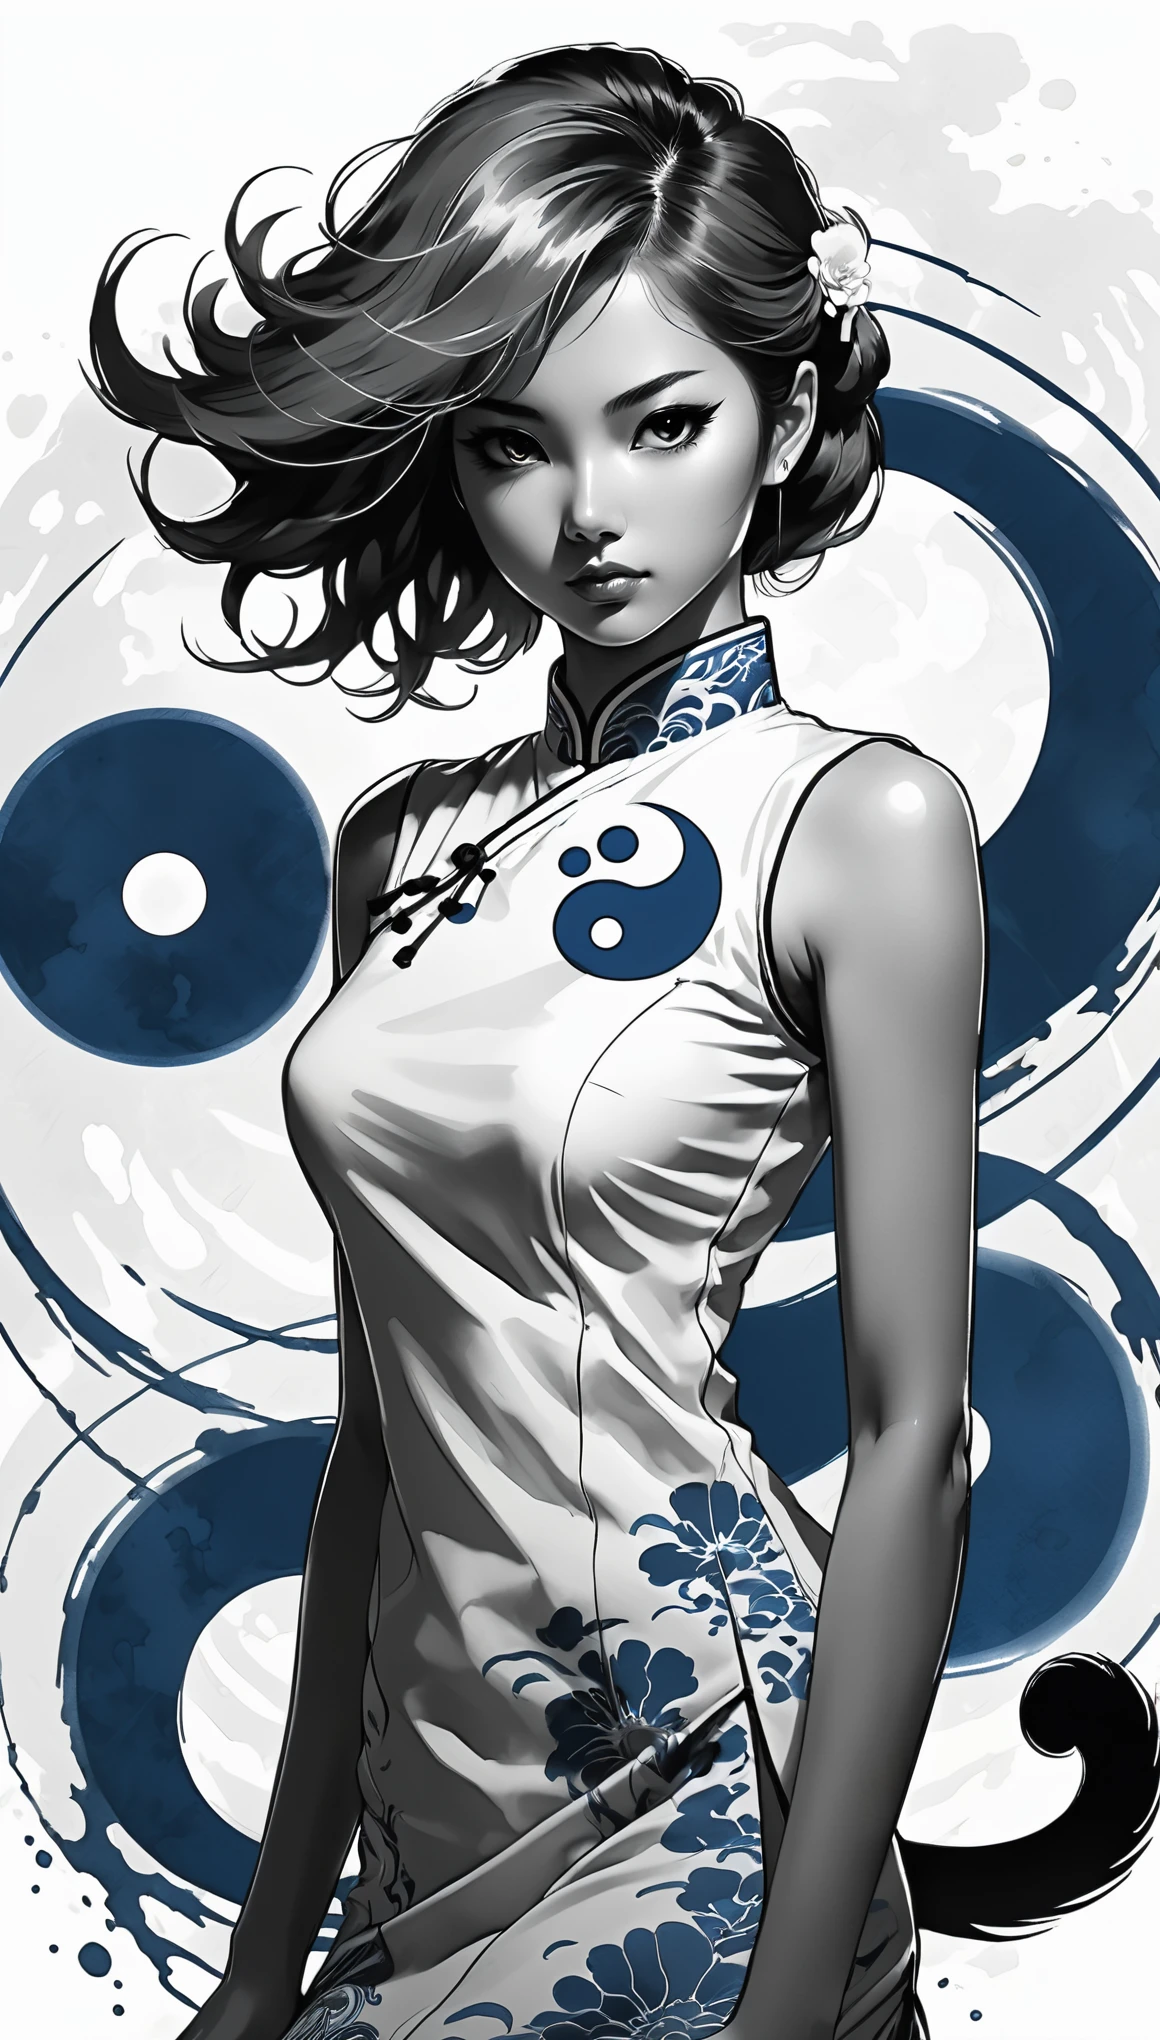 (Pencil_Sketch:1.2, messy lines, greyscale, traditional media, sketch),a girl, flesh red eyes,streaked hair, streaked hair, Blue and white porcelain cheongsam, Black and white yin yang tai chi background, gangster girl, backlight, Deep shadows, cat silhouette light, Cat squats on girl‘s shoulder, Charming suit cheongsam design, minimalist style, Tai Chi, Yin Yang style, Ink splash style background., chiaroscuro, glowing light, backlighting, motion lines, Carl Larsson, UHD, anatomically correct, masterpiece, retina, UHD, masterpiece